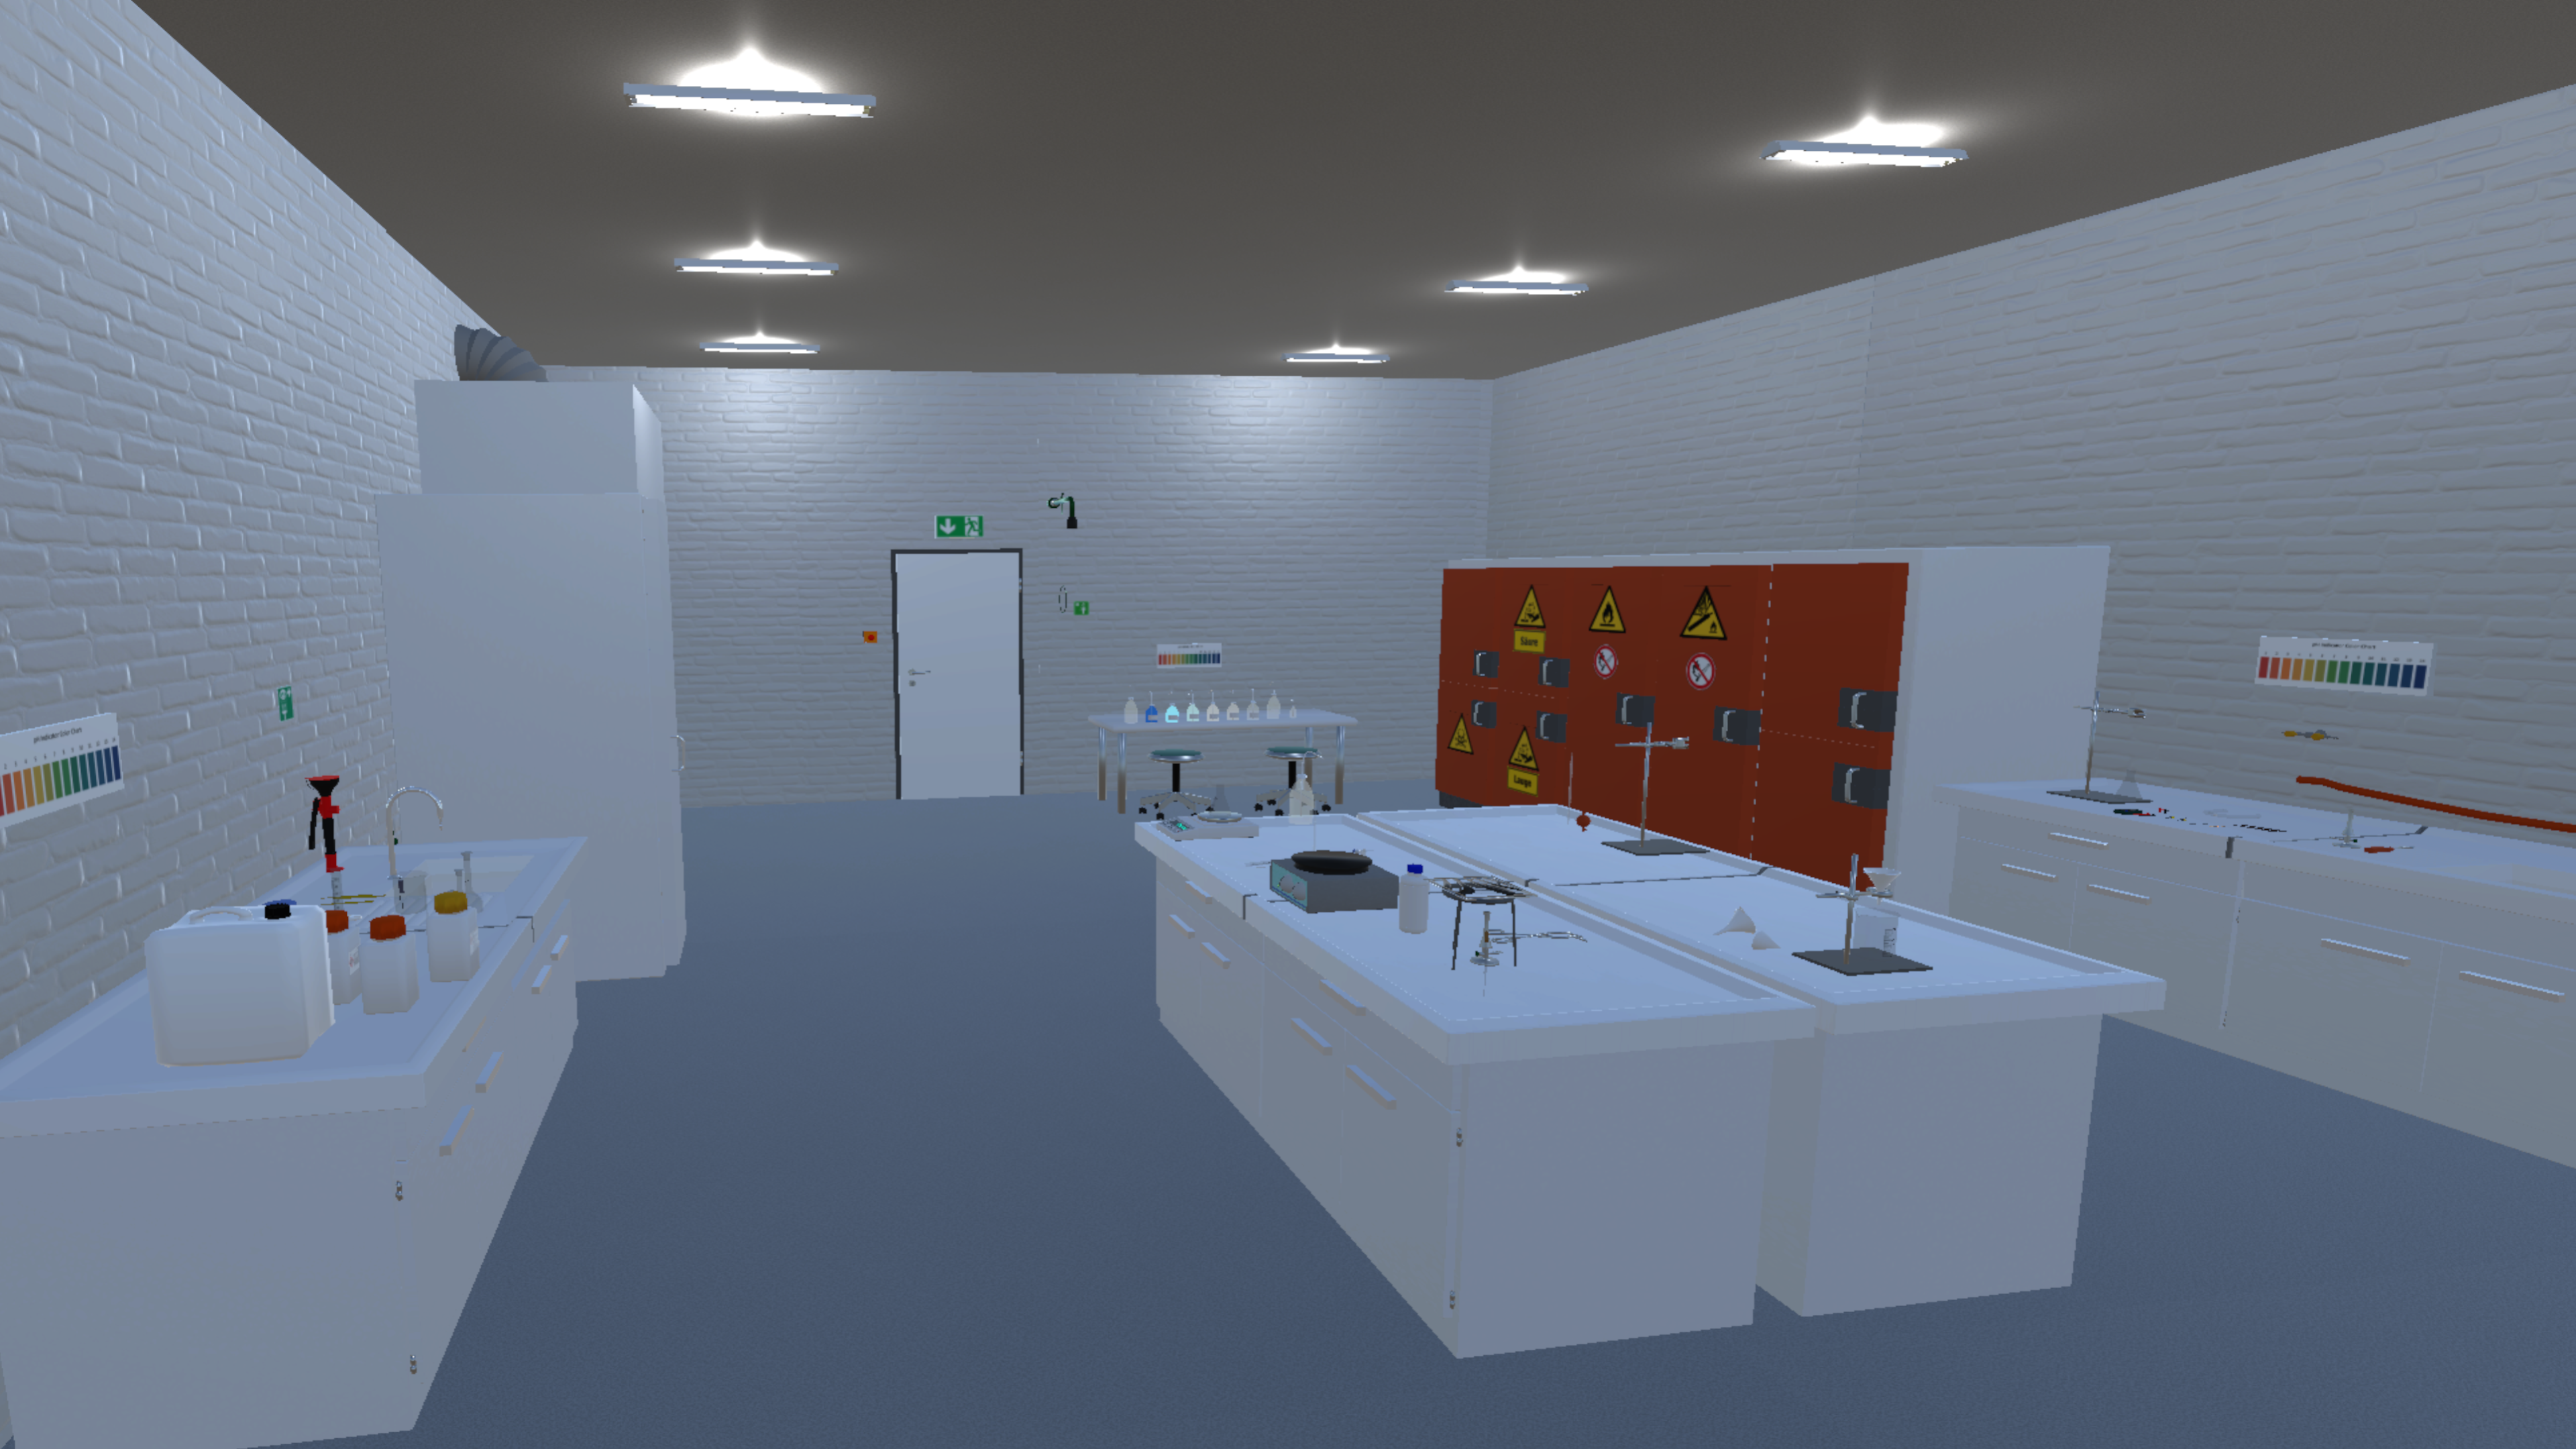 A screenshot from the VirtuChemLab virtual chemistry laboratory. One can see multiple tables with chemistry equipment lined up.